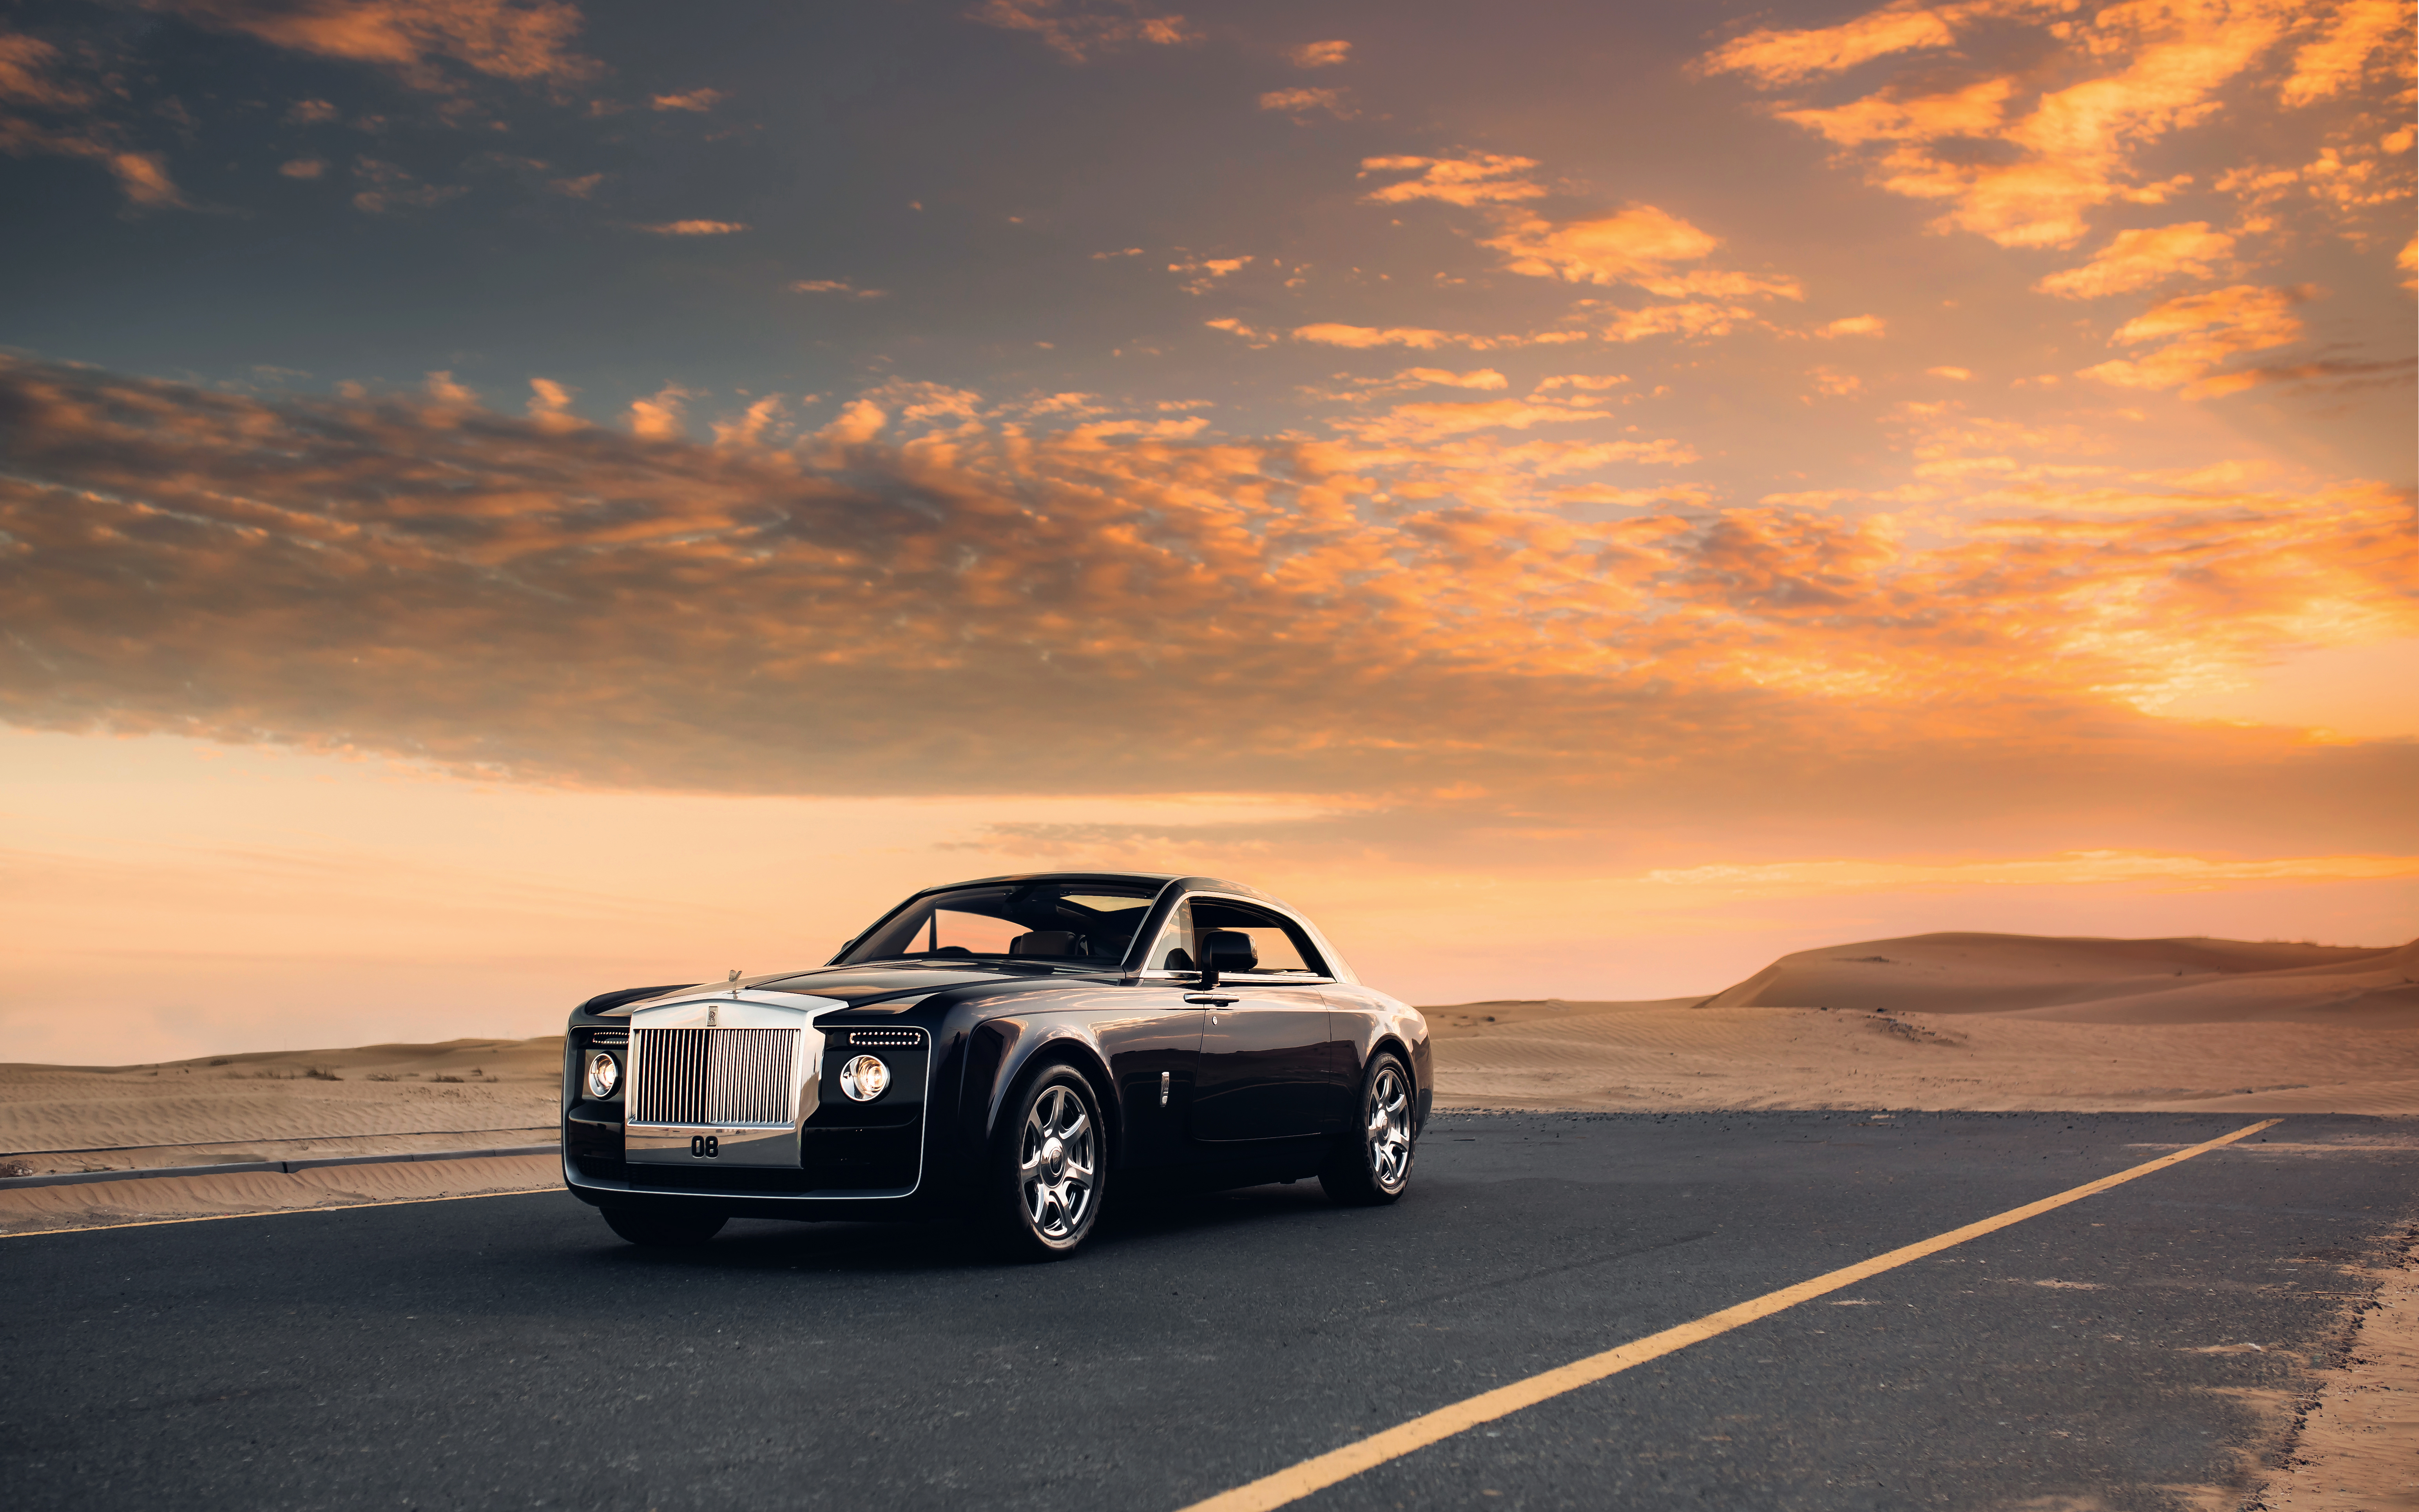 Rare Car PR: The Rolls-Royce Sweptail, a completely bespoke customer one-off, will crown a line-up of Future Classics at Concours of Elegance 2018